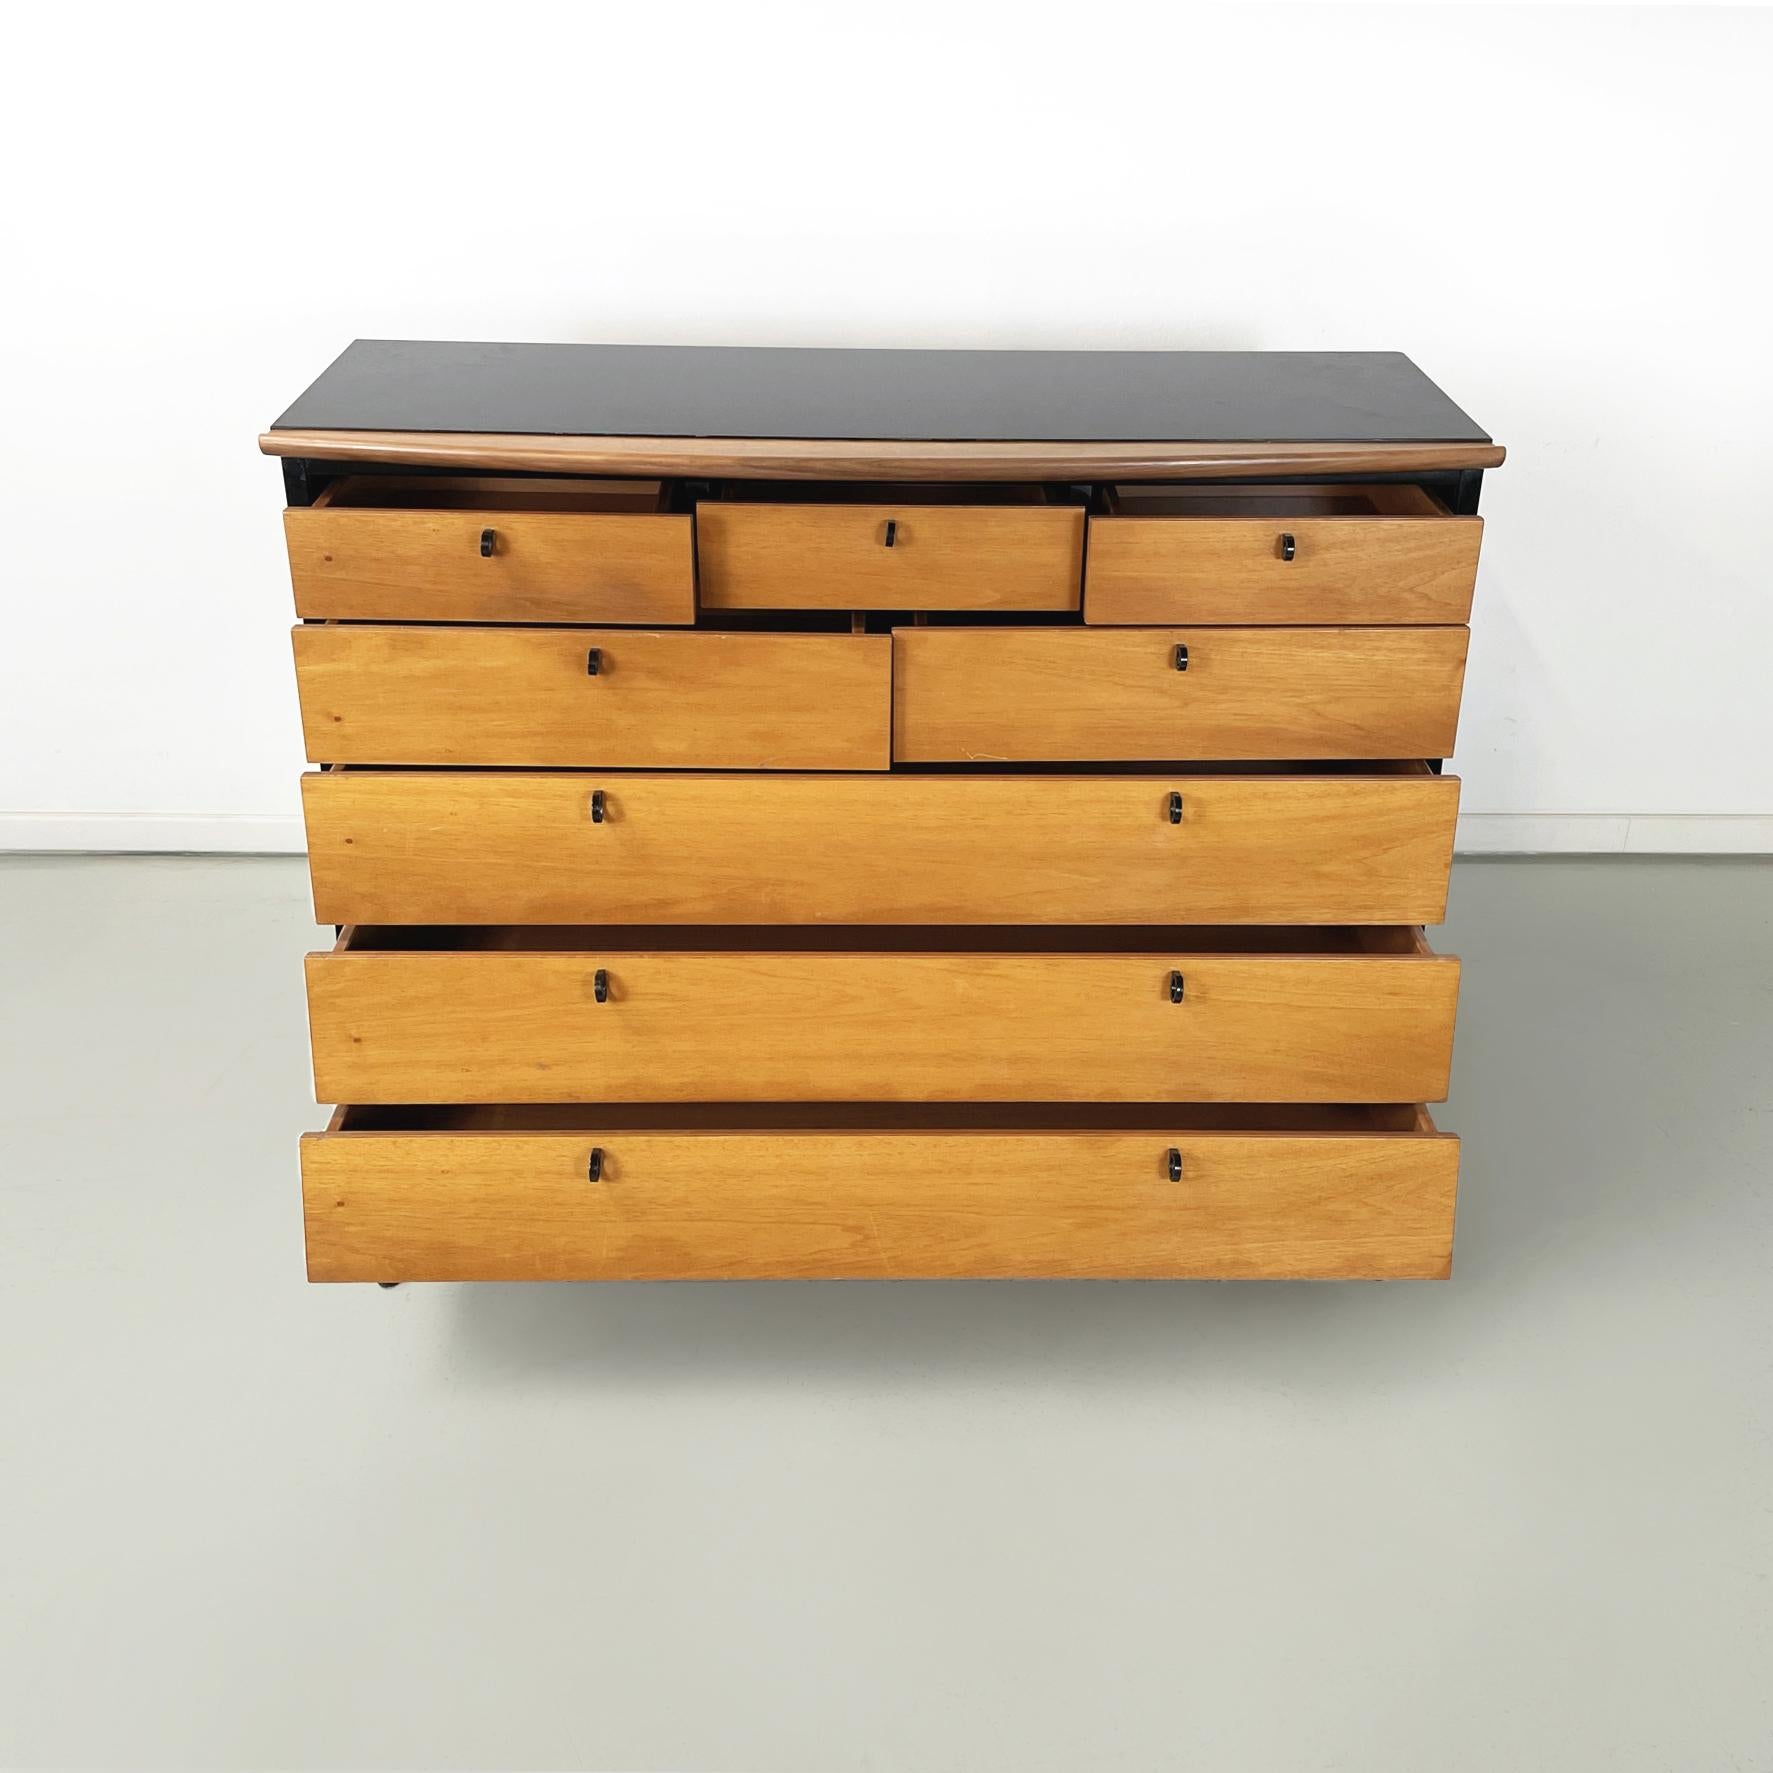 Modern Italian modern black wood Chest of drawers by Umberto Asnago for Giorgetti 1980s For Sale